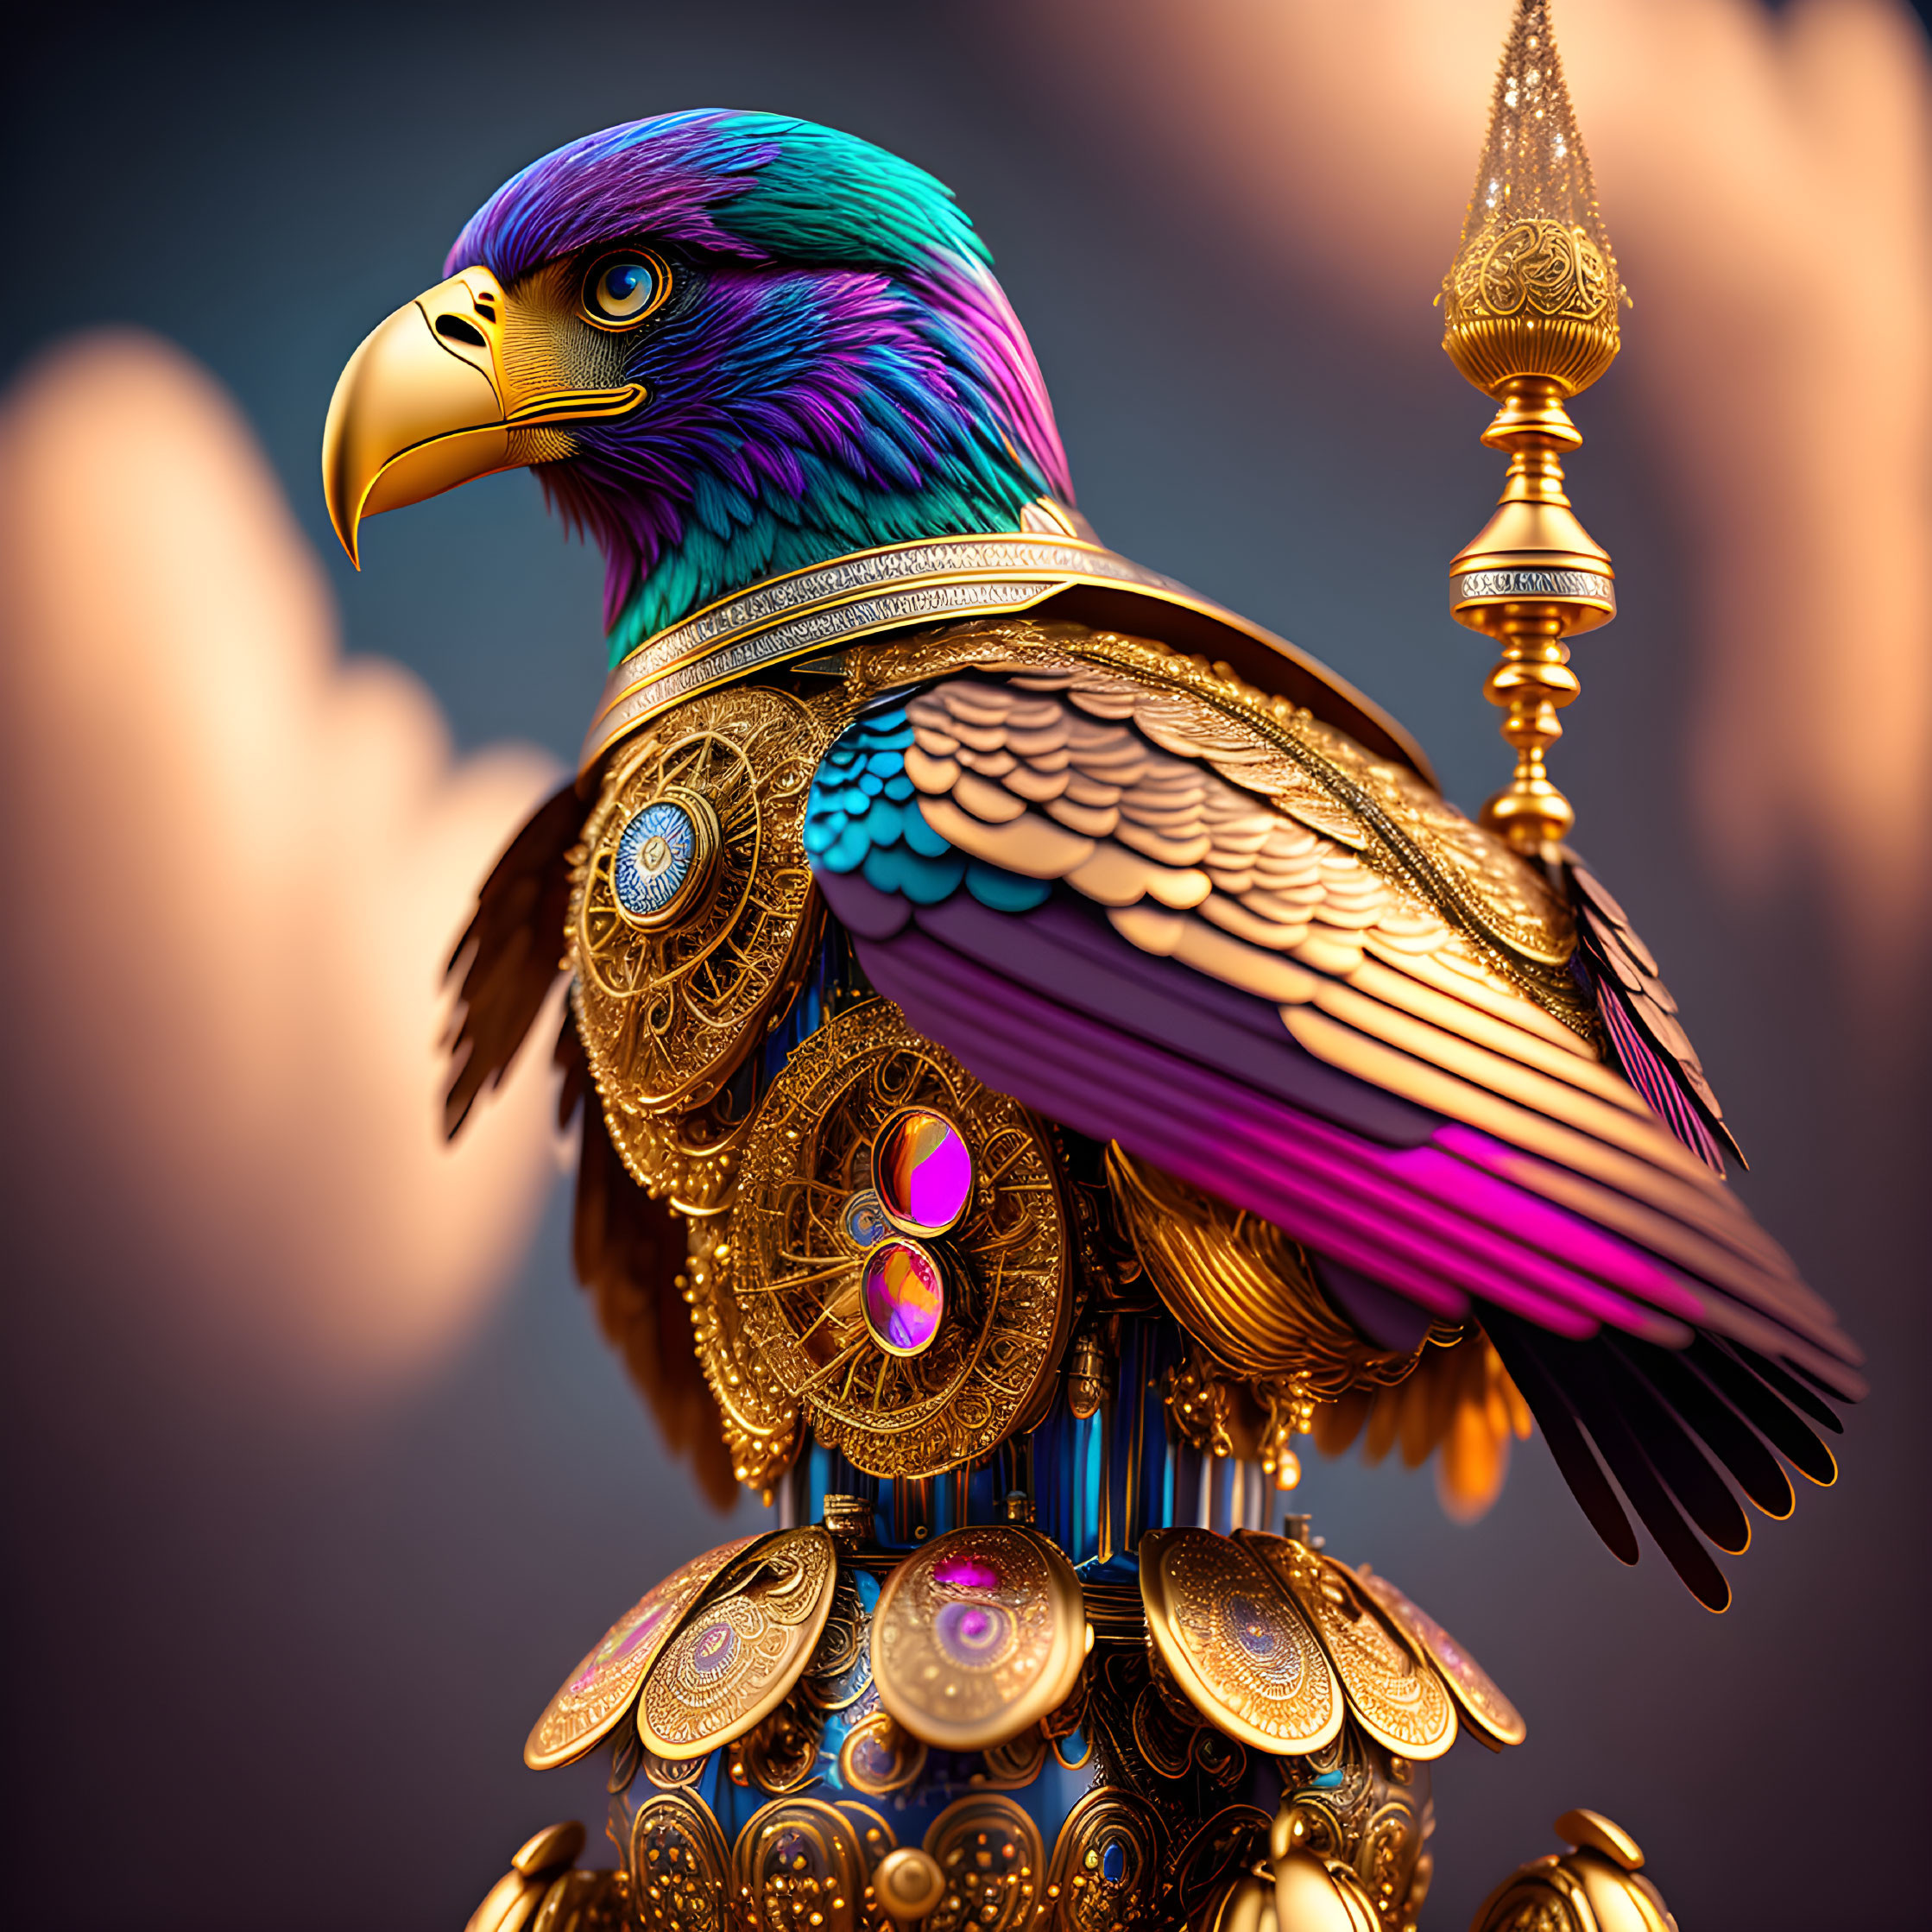 Mechanized eagle digital artwork with purple and gold plumage in steampunk style